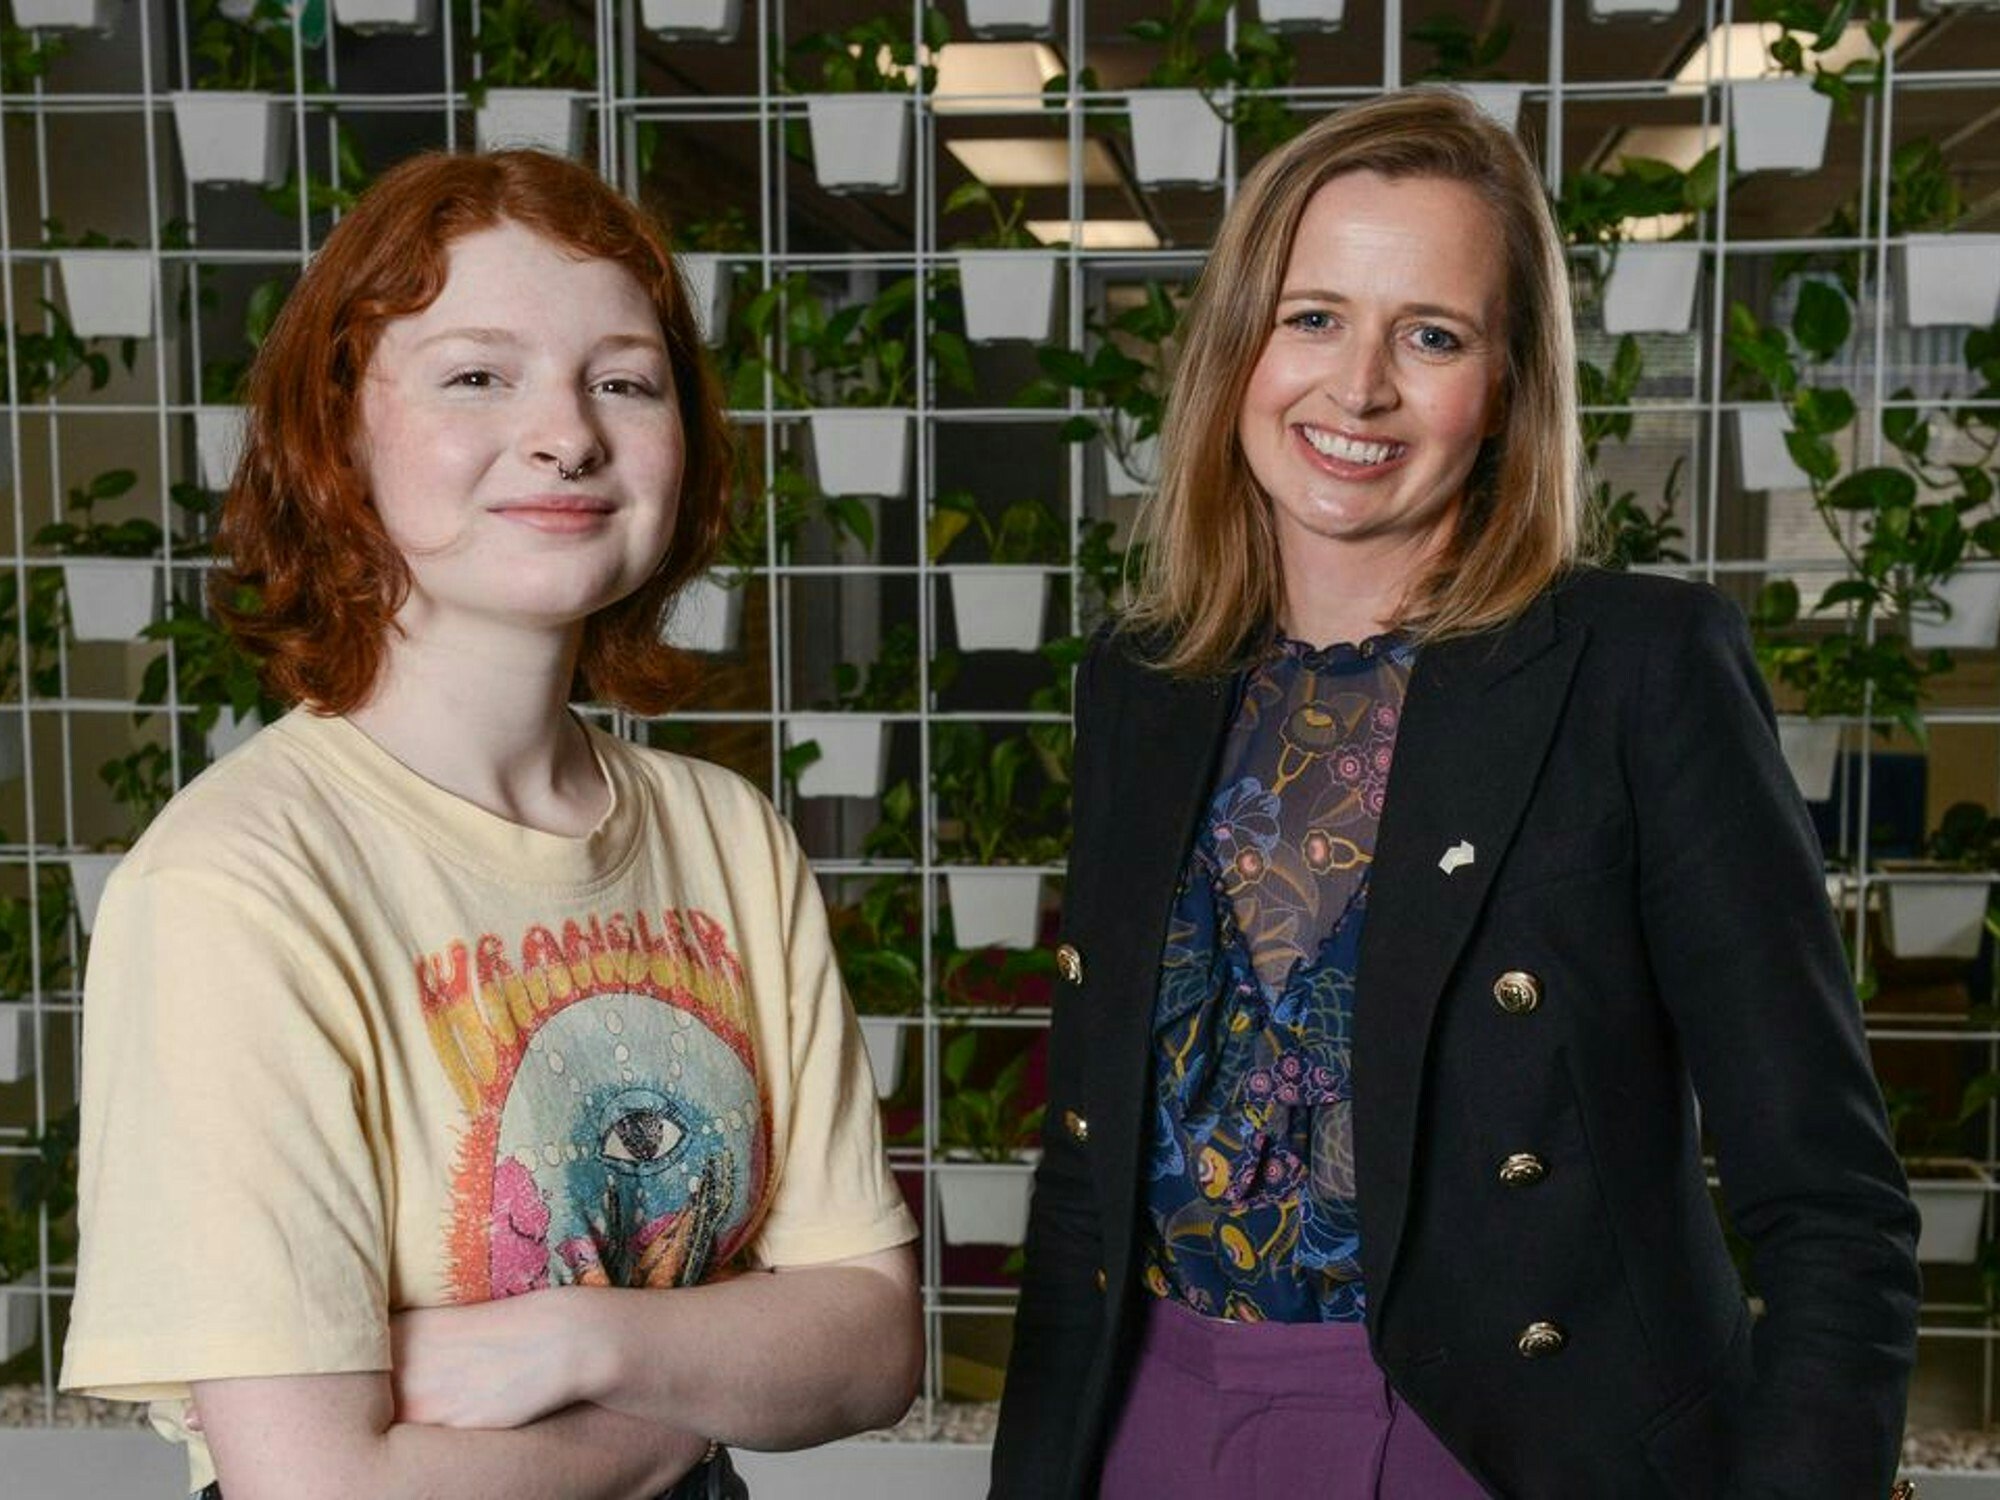 <p>Minister Emily Bourke (right) has a &#8220;complex problem to solve&#8221; according to Autism Awareness Australia. [Source: Twitter]</p>
